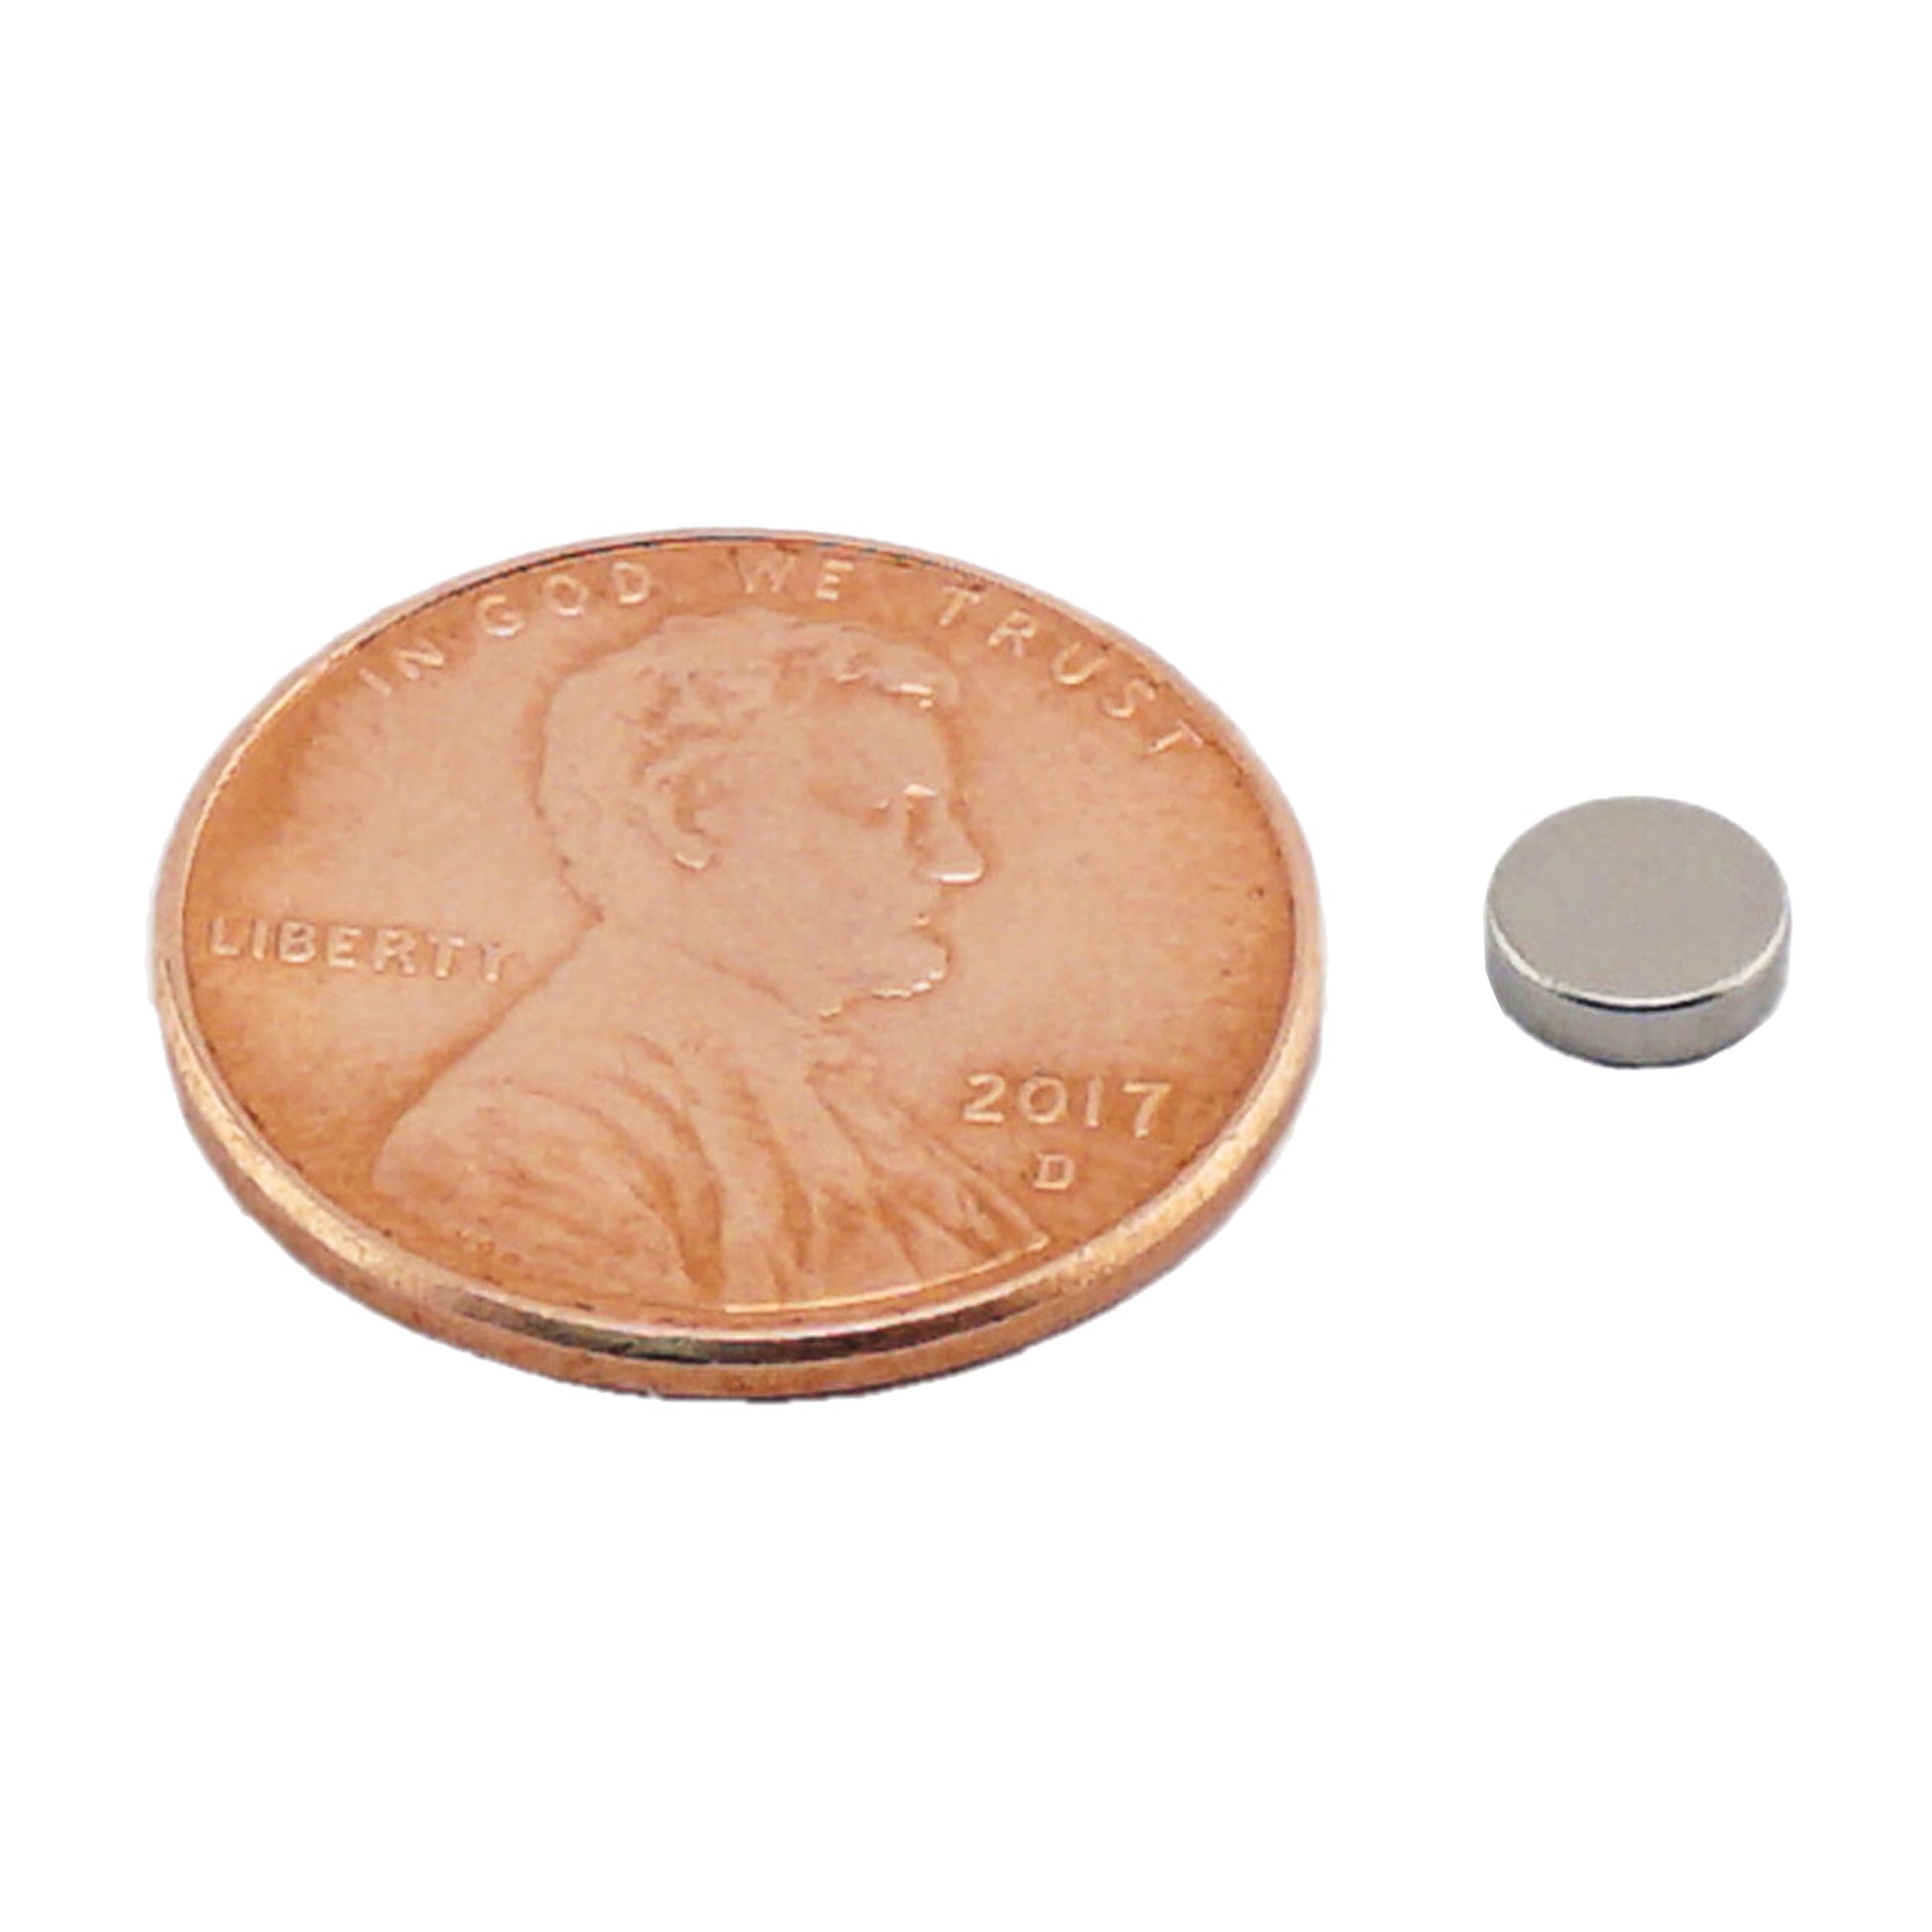 Load image into Gallery viewer, ND022N-35 Neodymium Disc Magnet - Compared to Penny for Size Reference